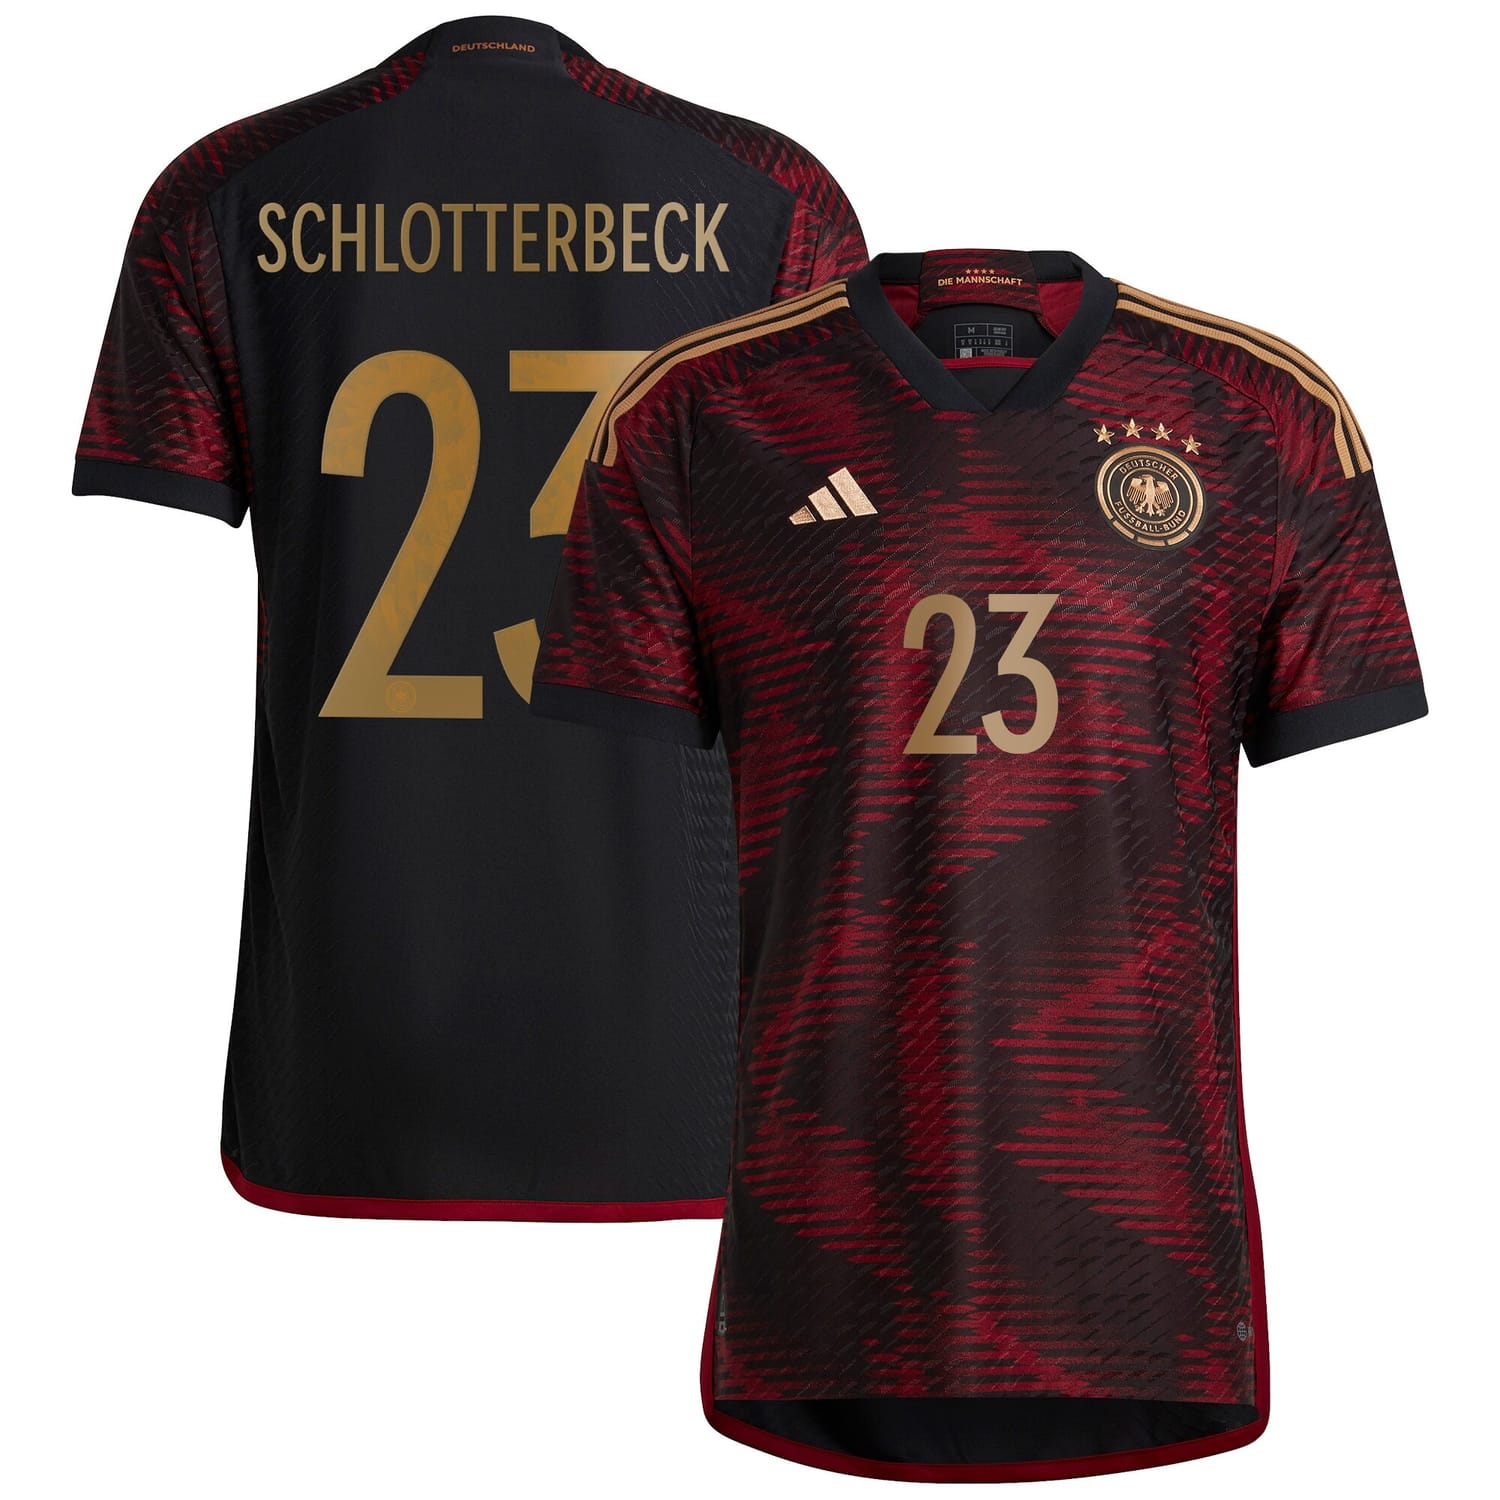 Germany National Team Away Authentic Jersey Shirt player Nico Schlotterbeck 23 printing for Men